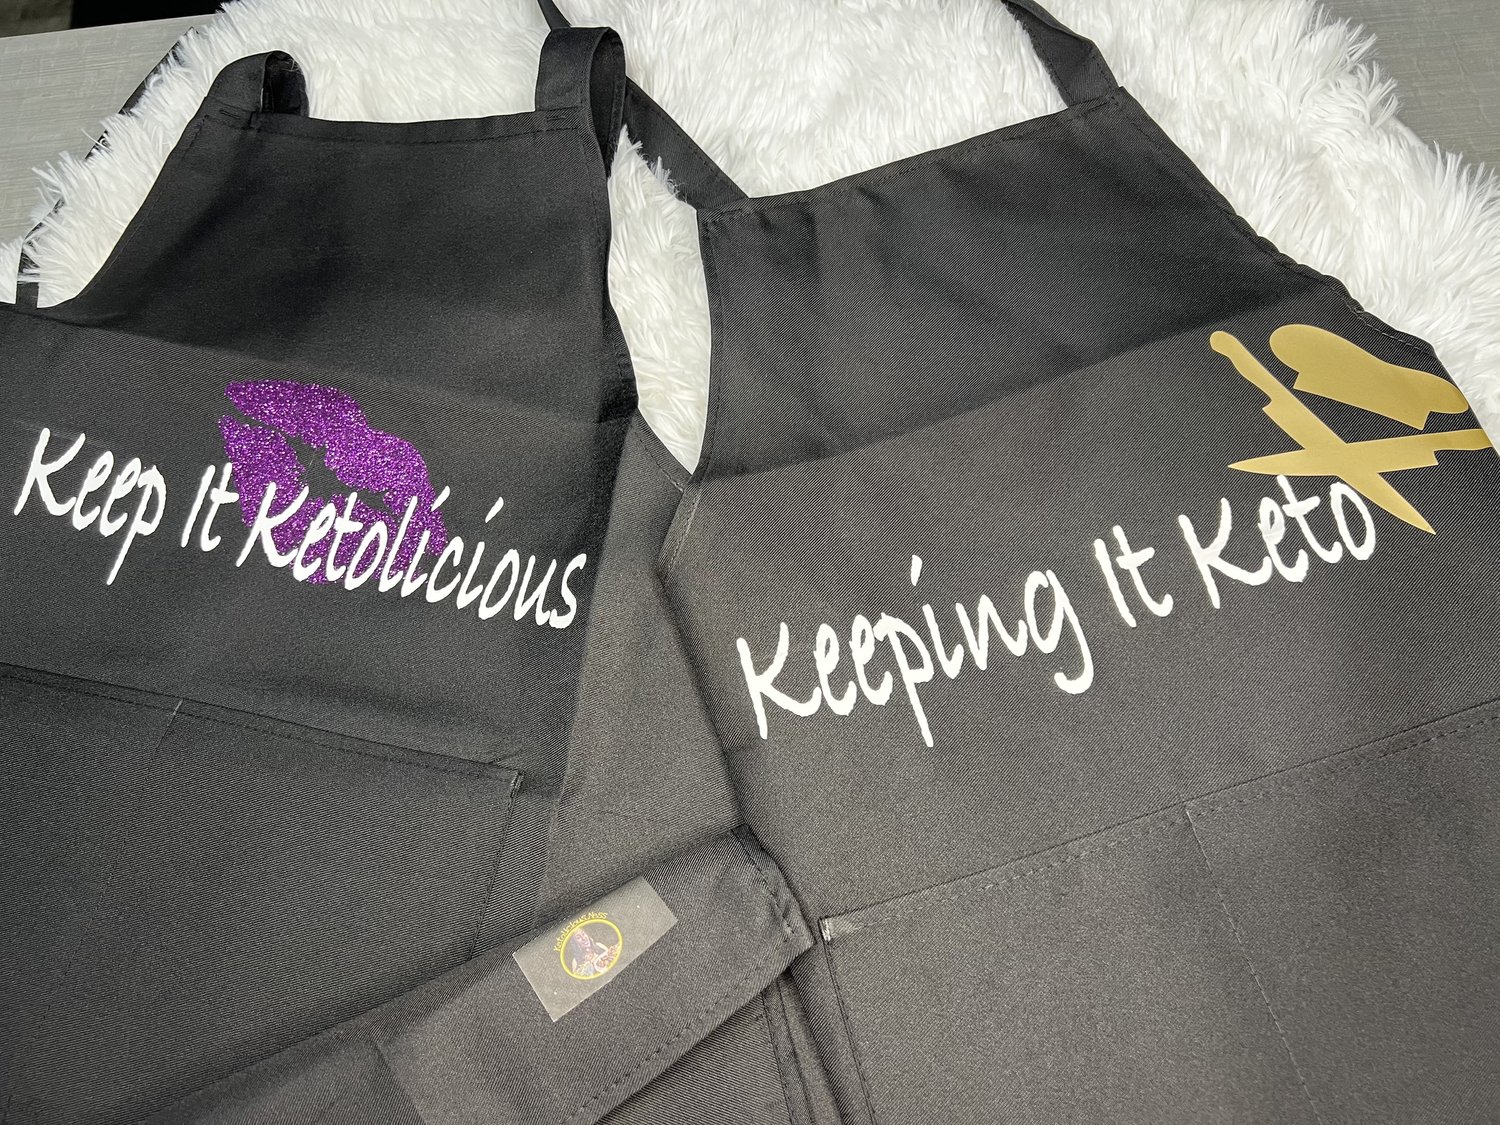 All About Dirty Keto - 40 Aprons